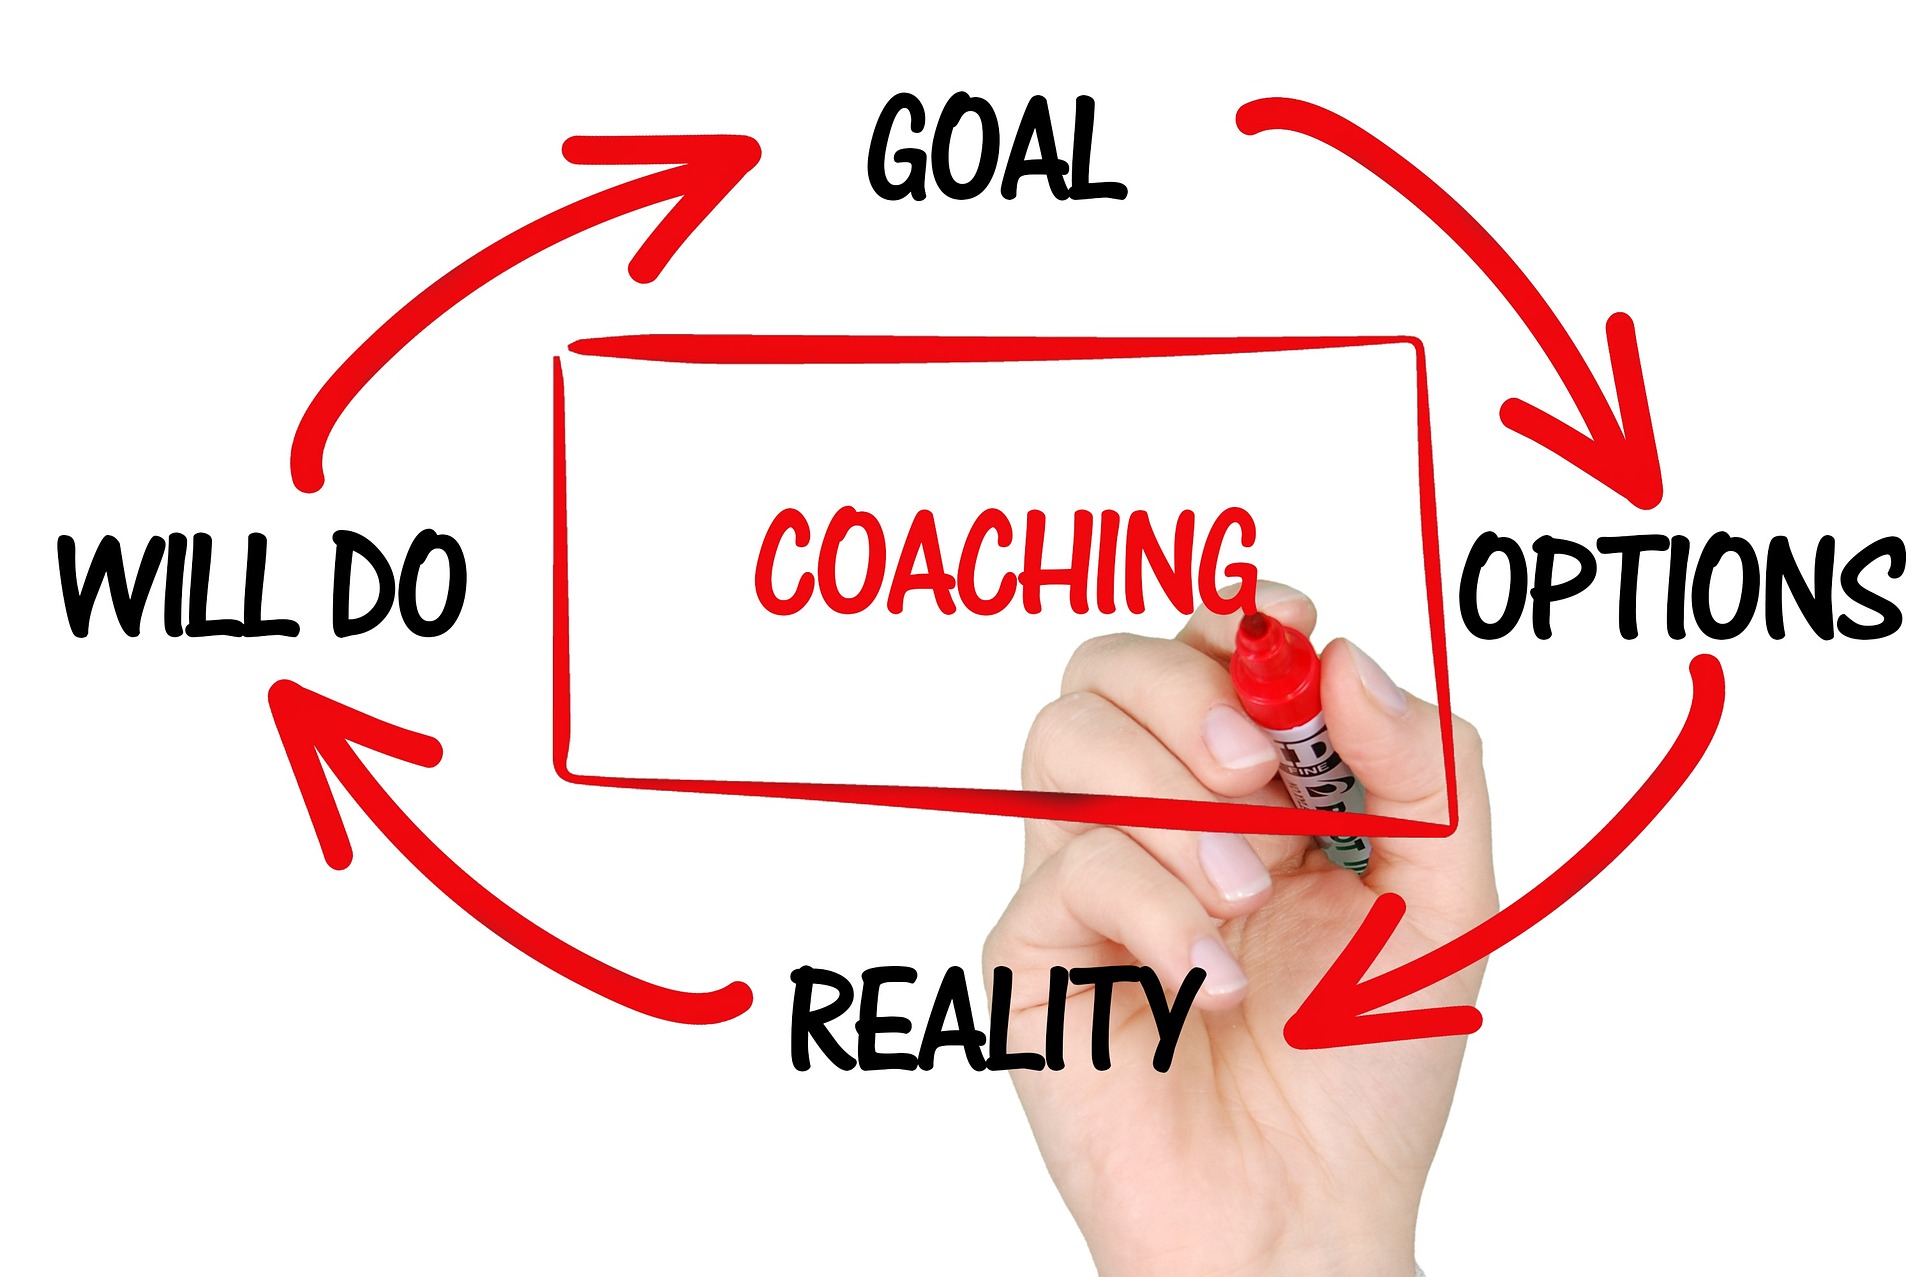 What are the Ways Professional Growth Coaching Changes Your Business?